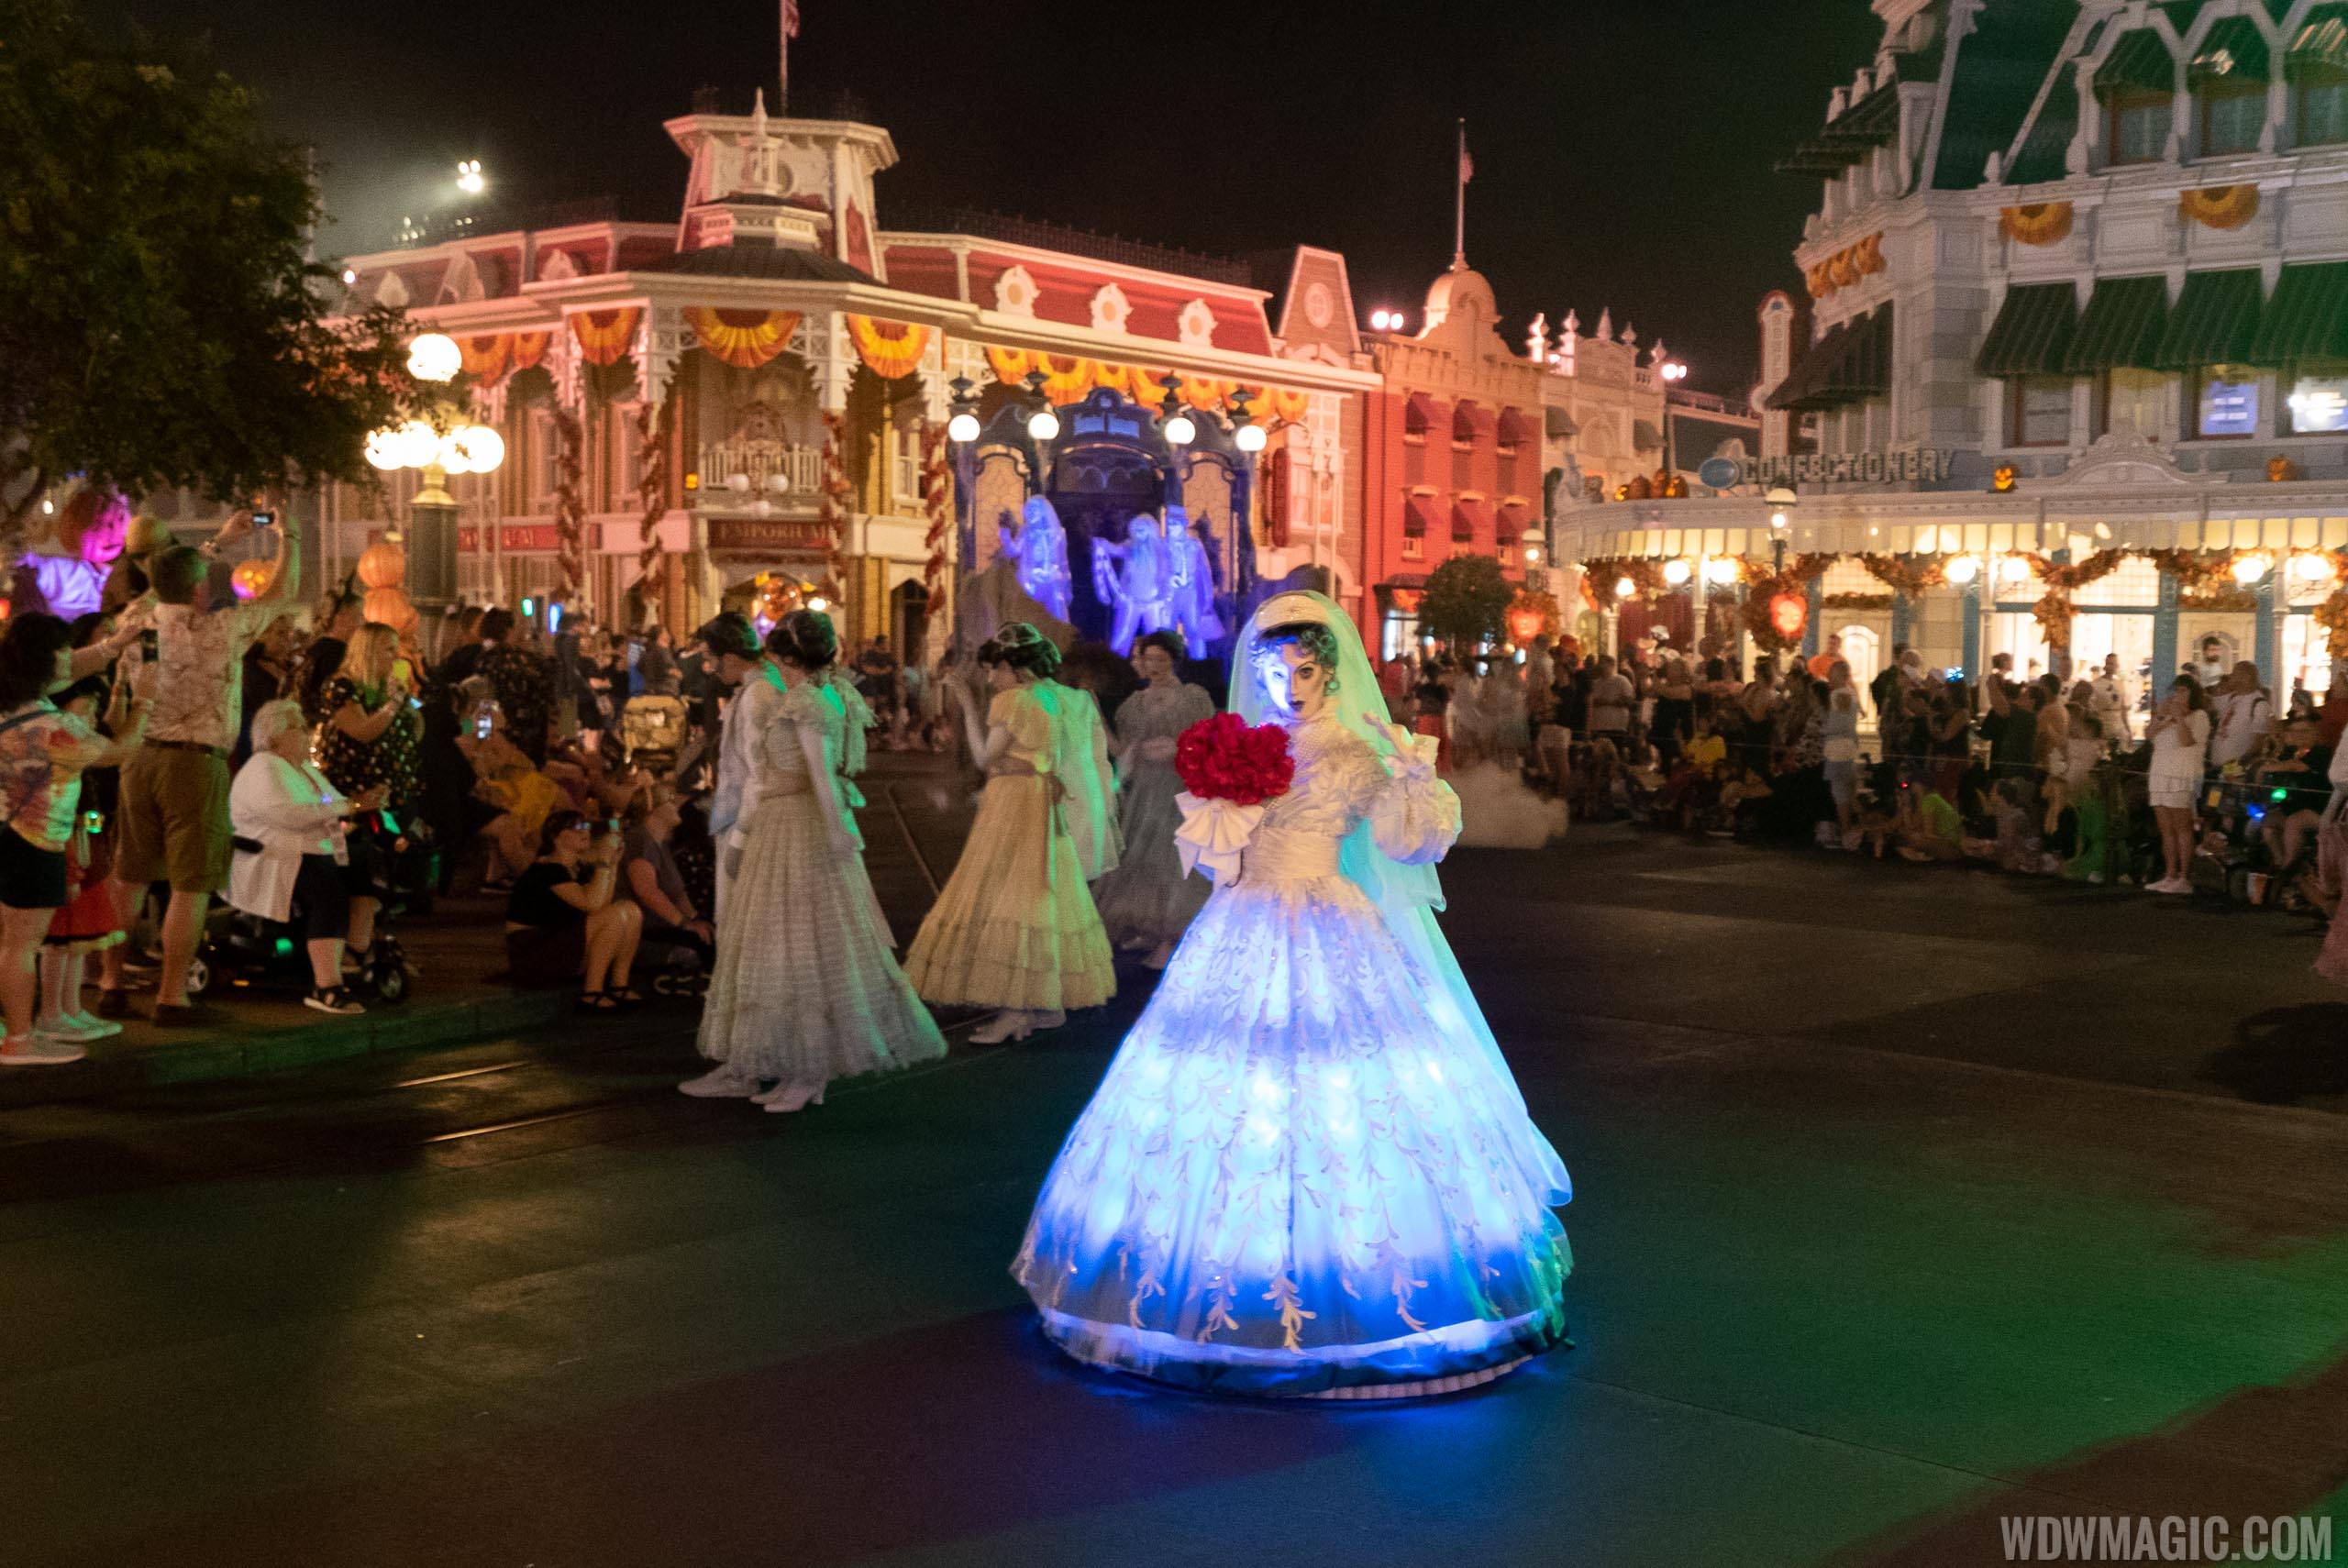 VIDEO - New additions come to Mickey's Boo To You Halloween Parade